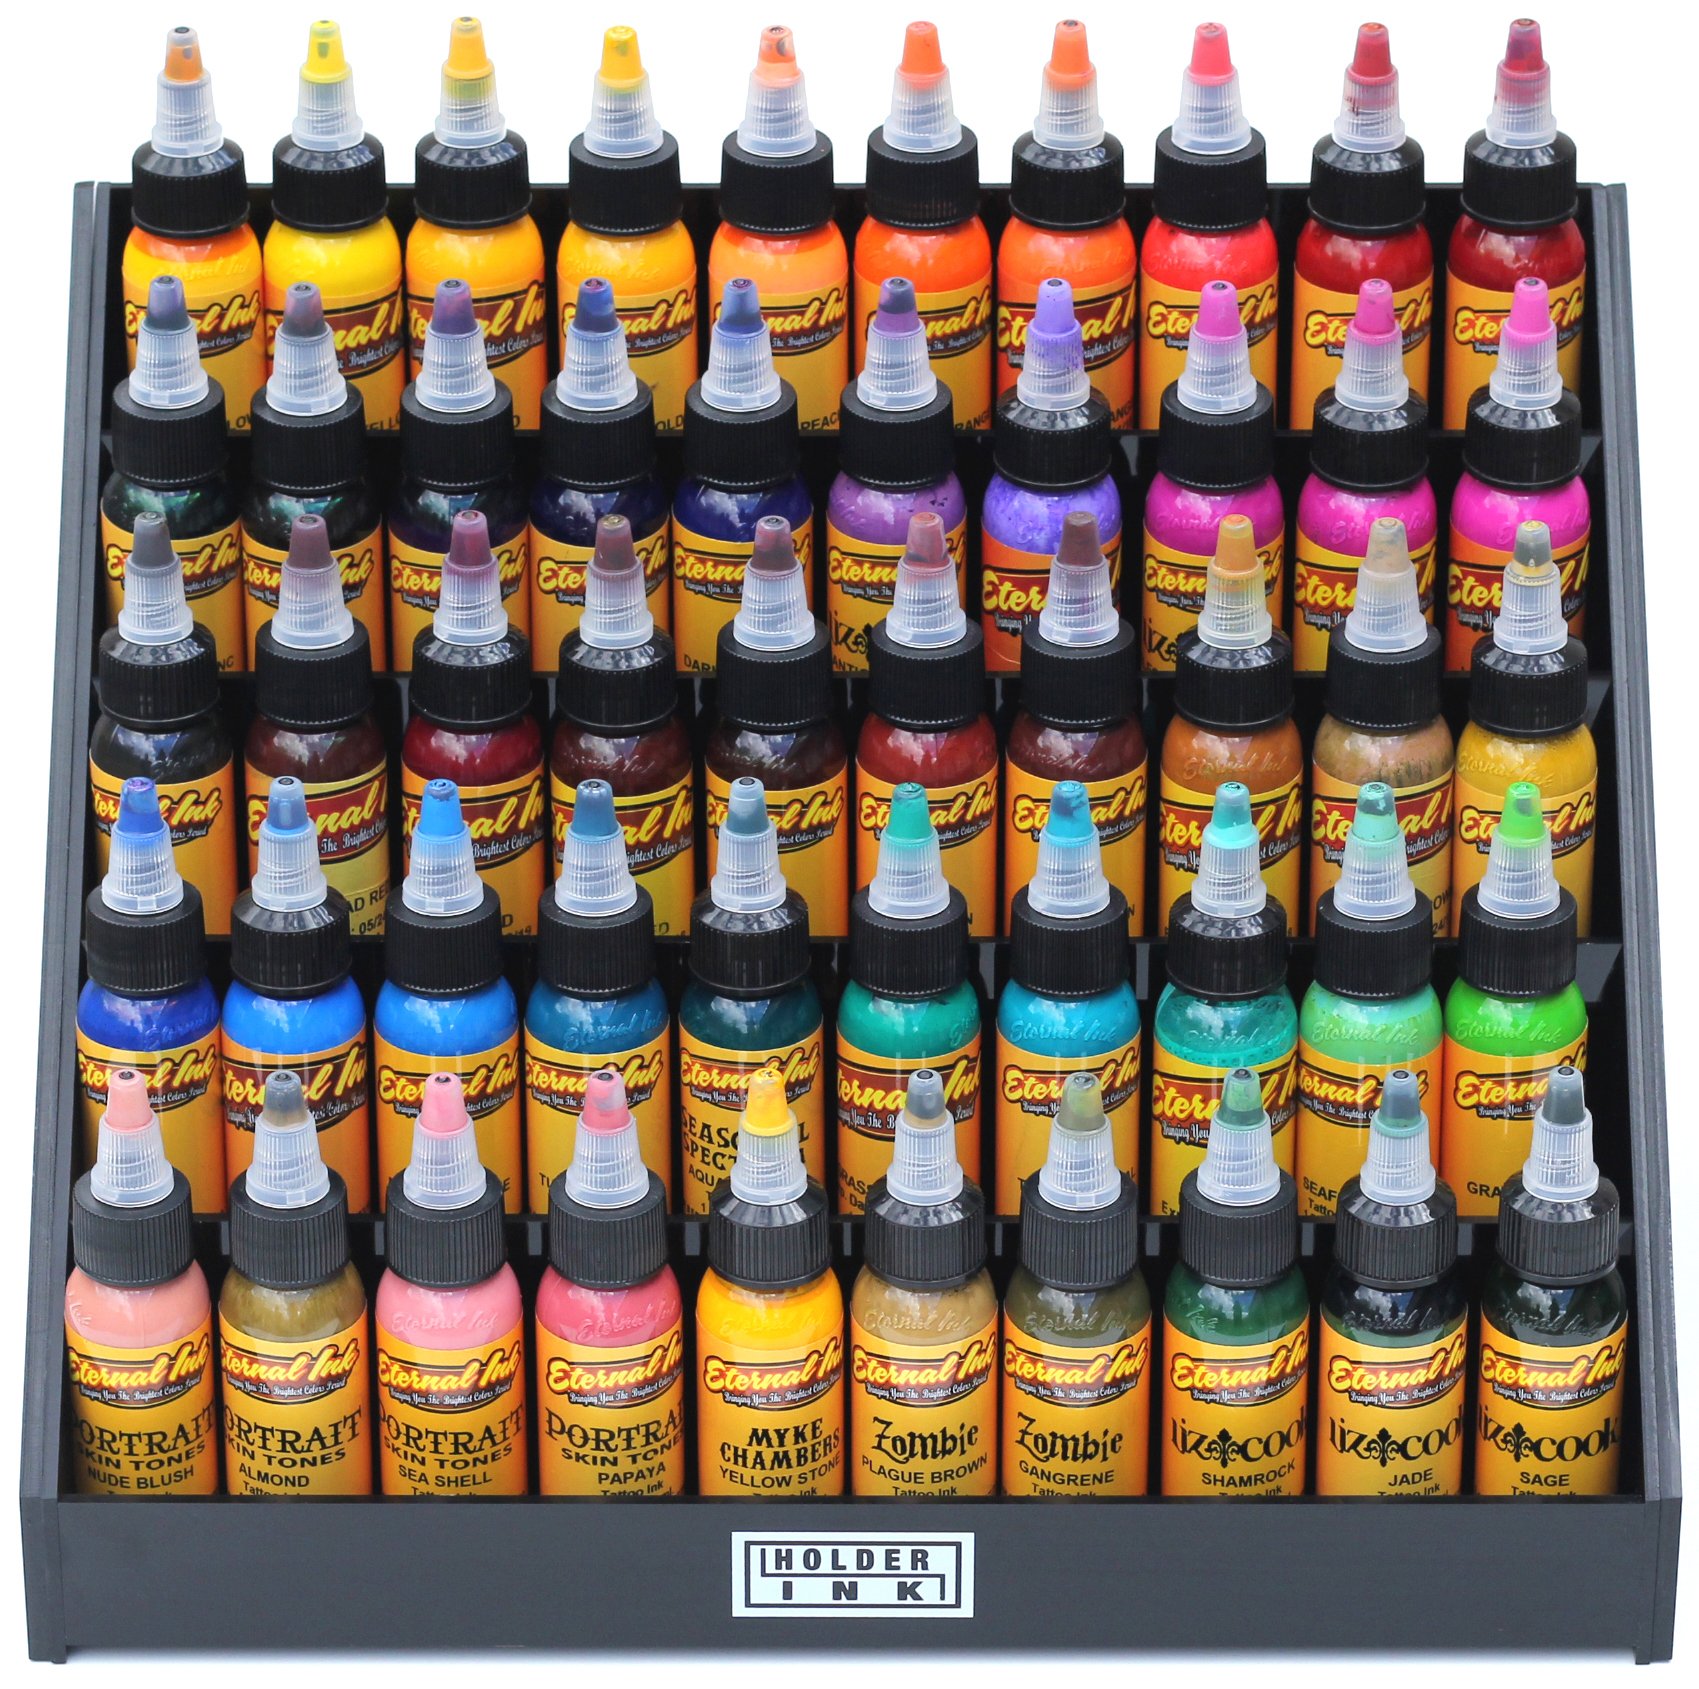 Holder Ink acrylic display stand organizer for tattoo inks, nail polish bottles and other beauty essentials that keeps them organized, secured and ready to use.